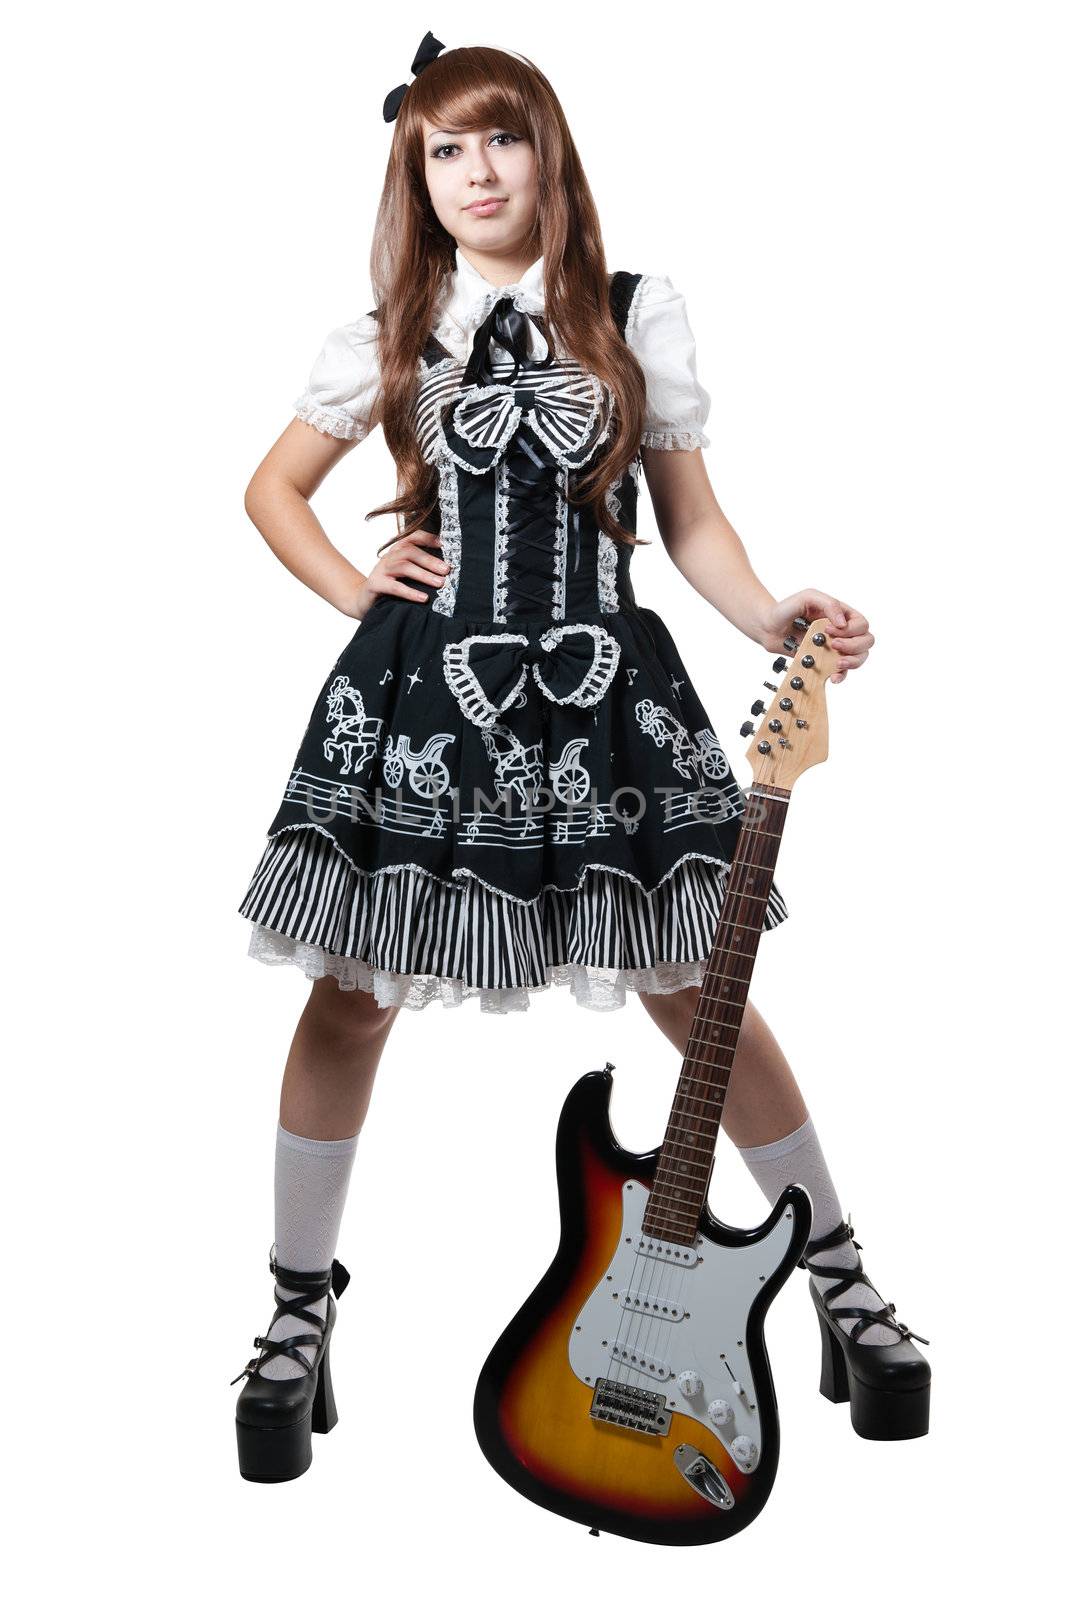 Cosplay girl in black dress with guitar by zybr78